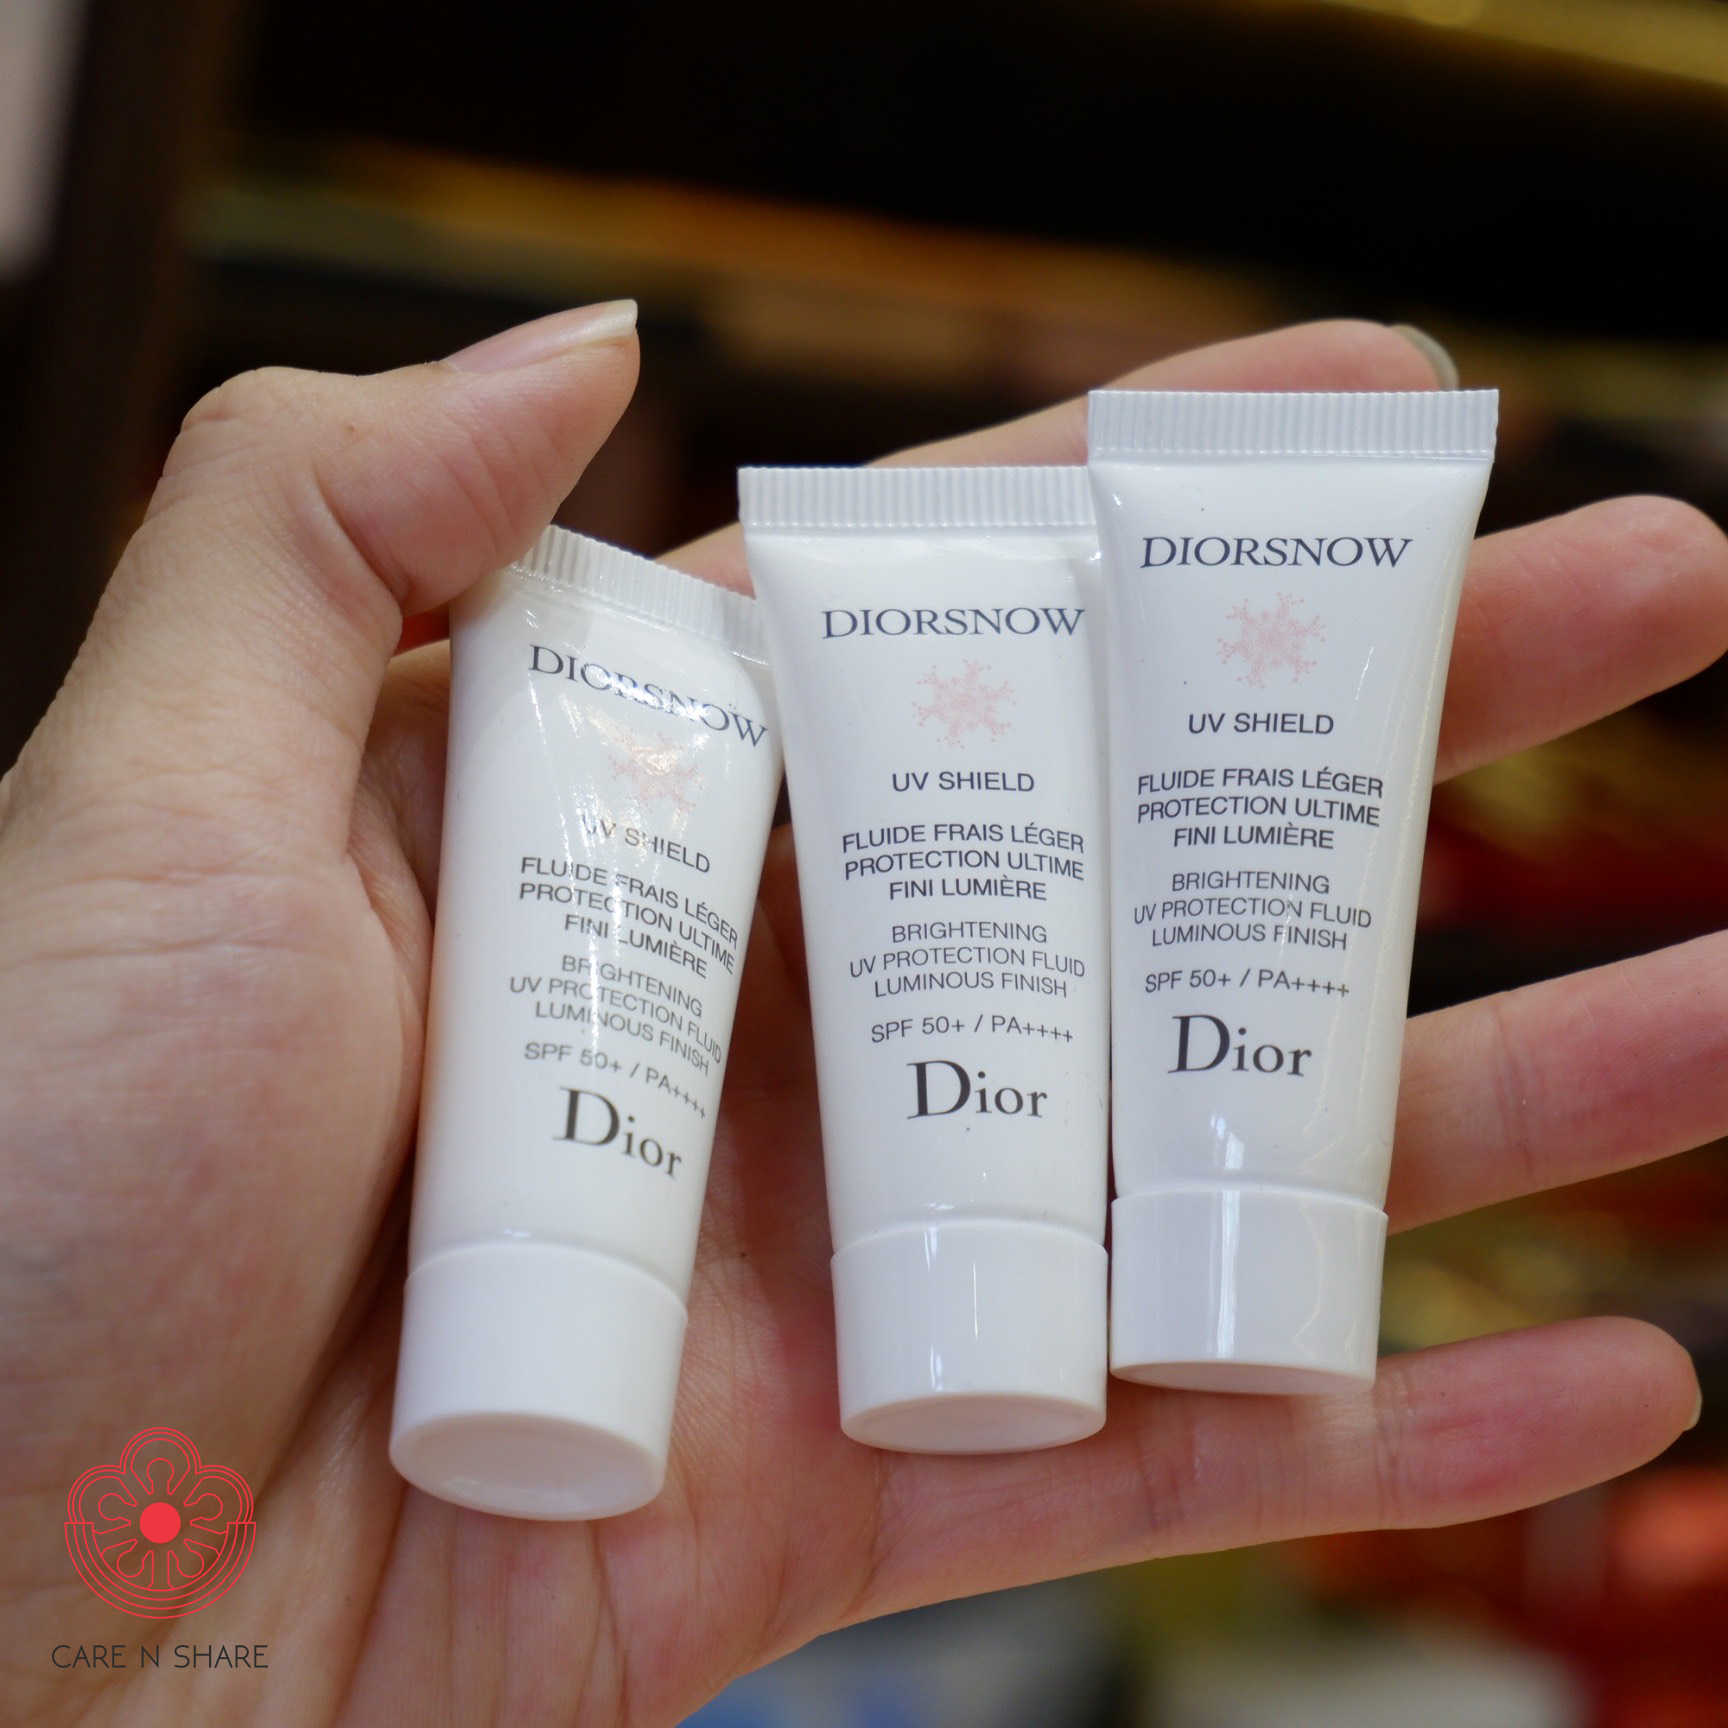 Diorsnow  The collections  Skincare  DIOR